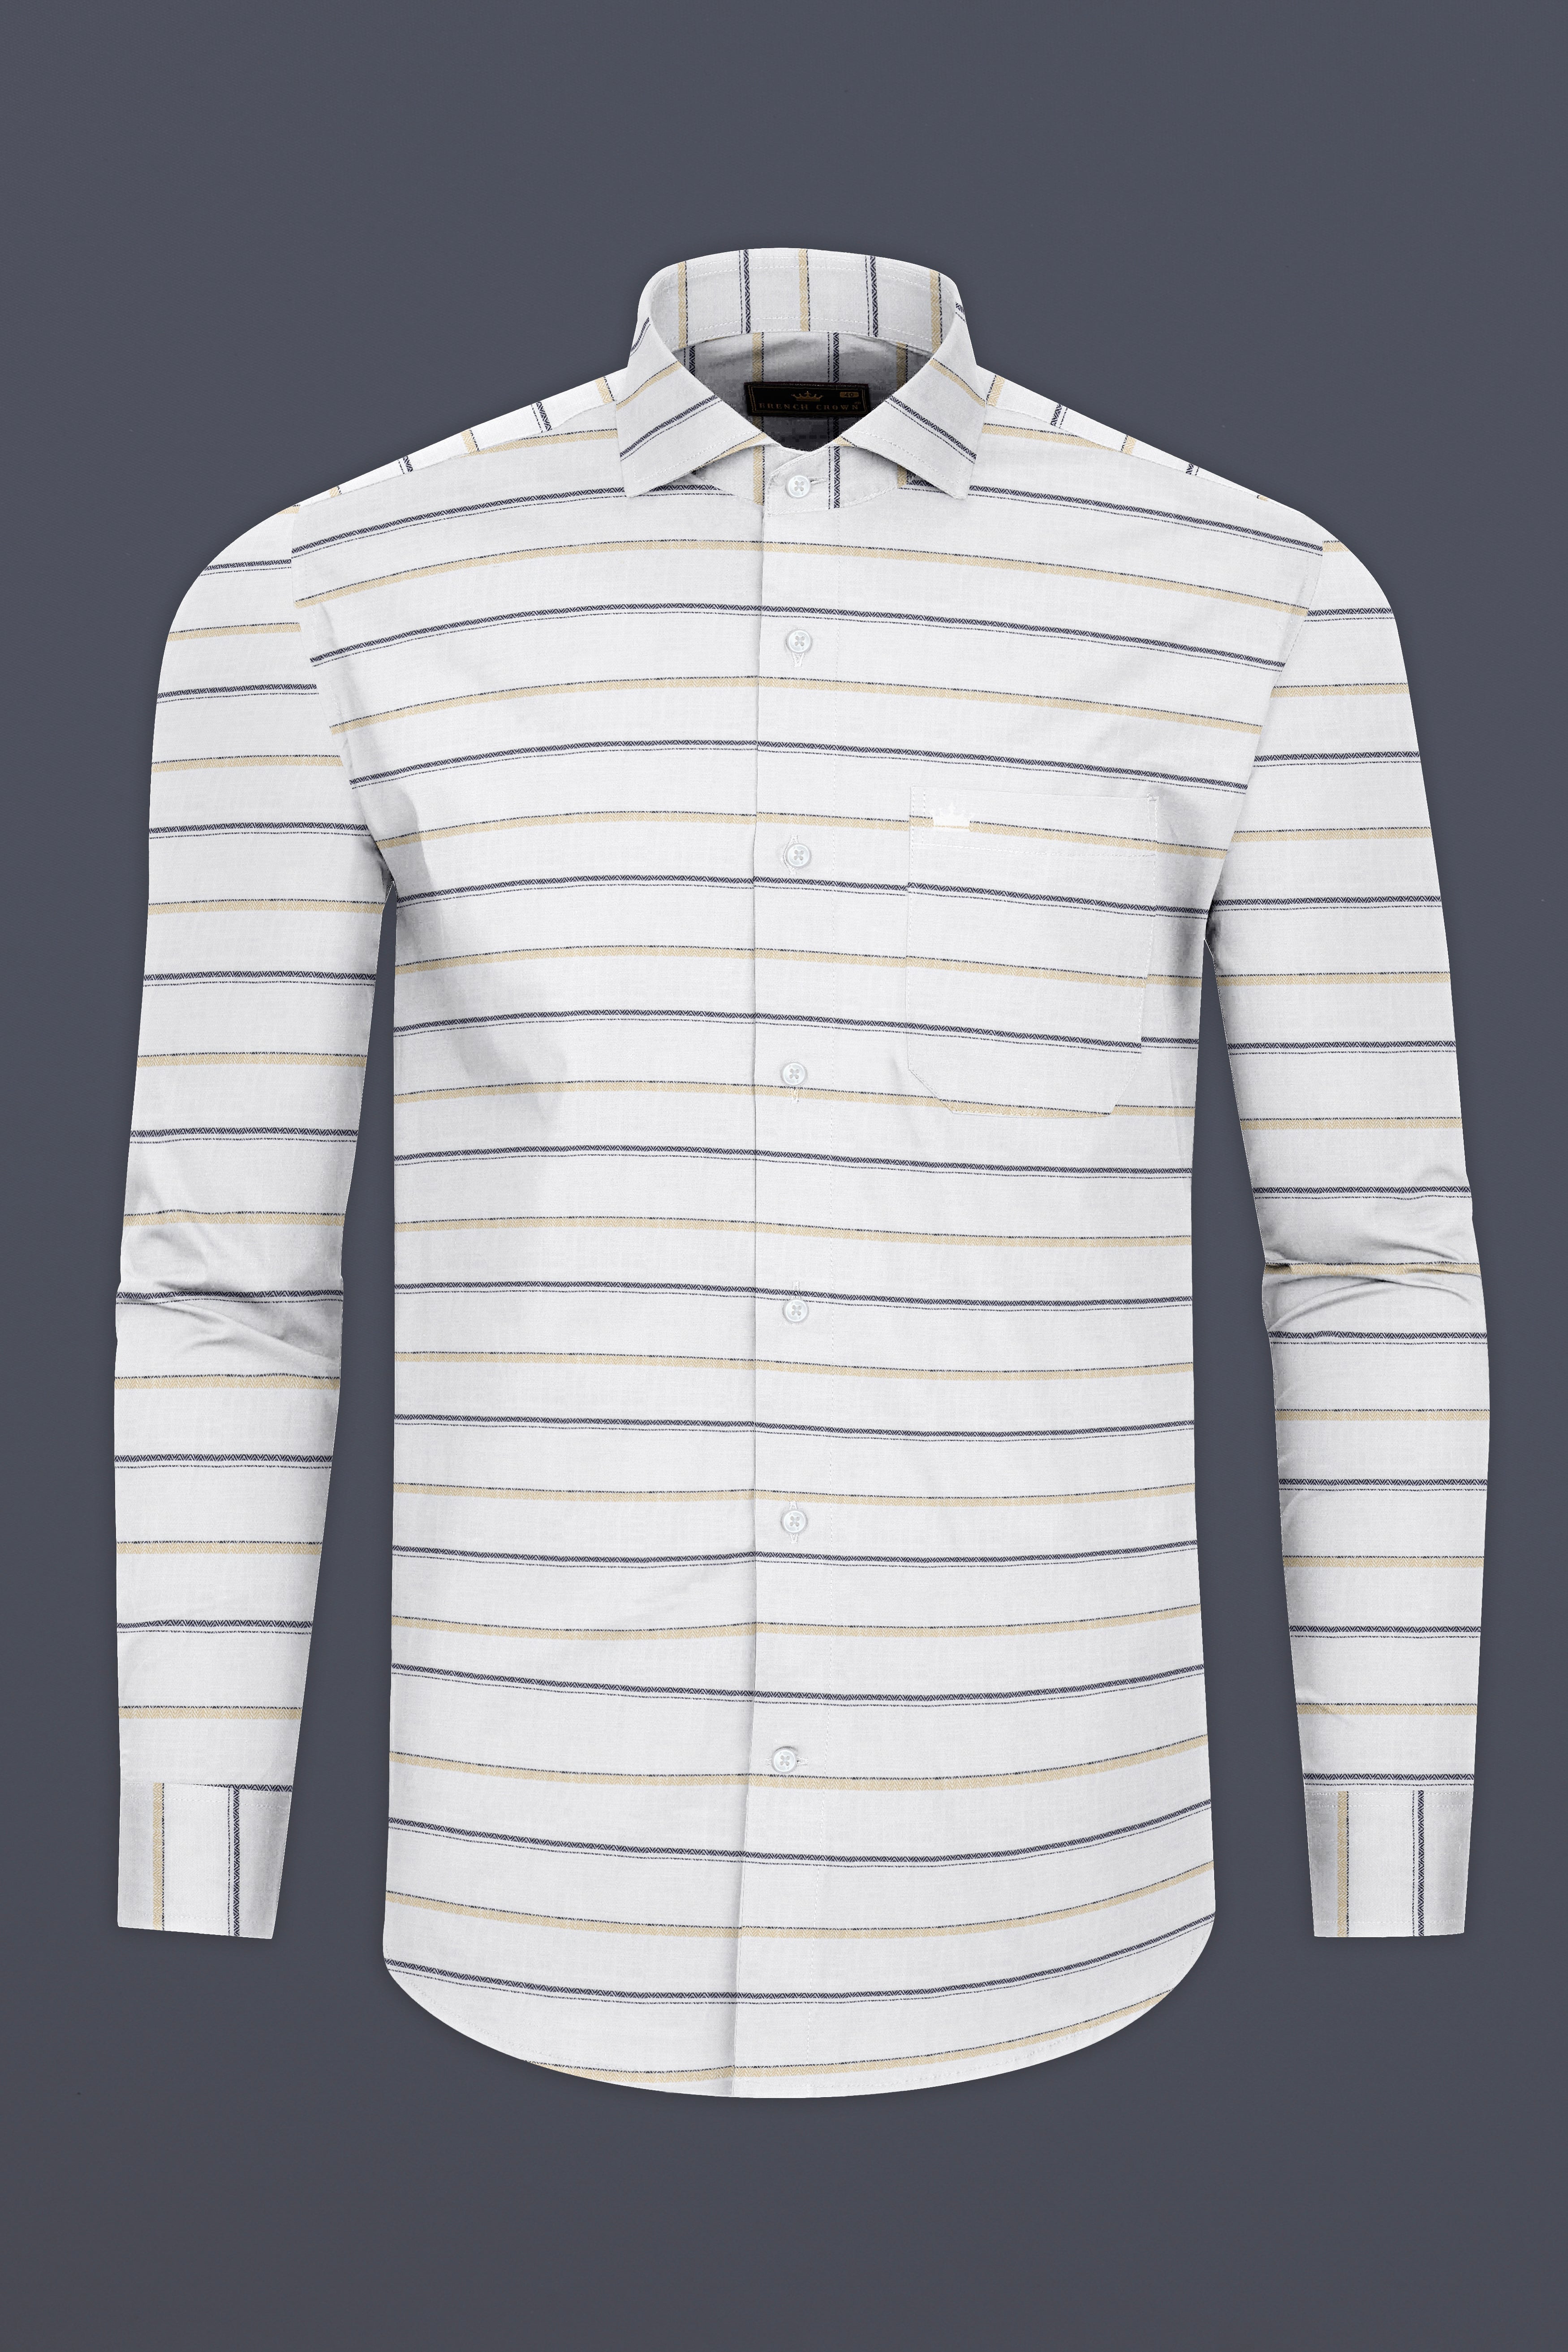 Bright white with Ebony Blue and Brown Striped Dobby Textured Premium Giza Cotton Shirt